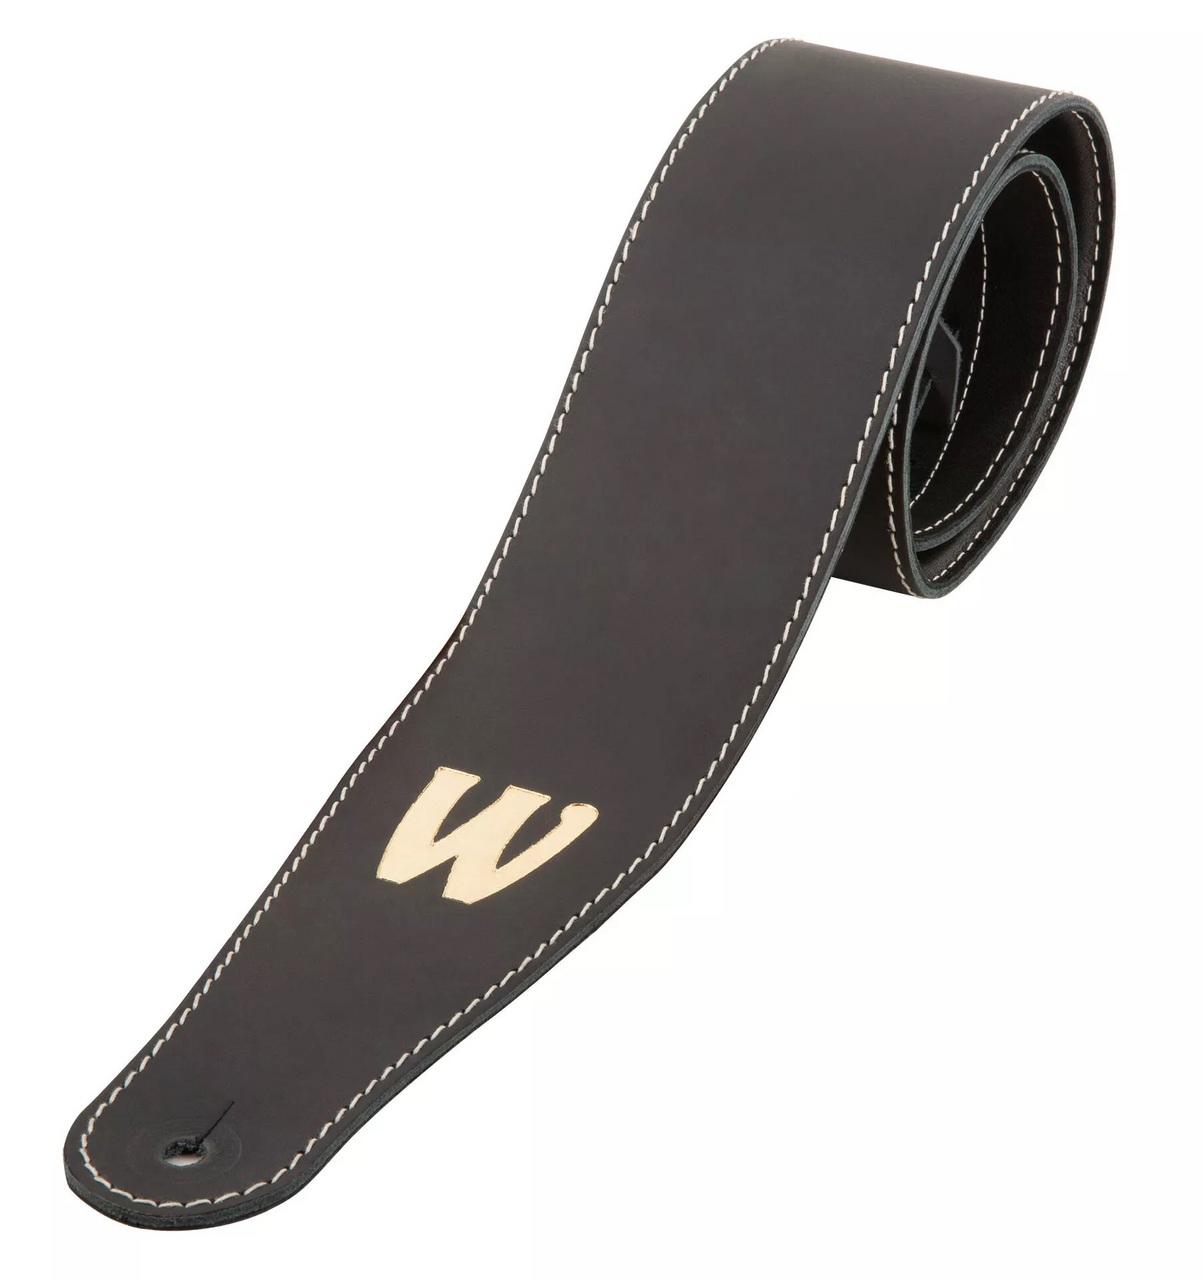 Warwick Teambuilt Genuine Leather Bass Strap Black Gold Embossing【Made in Germany】